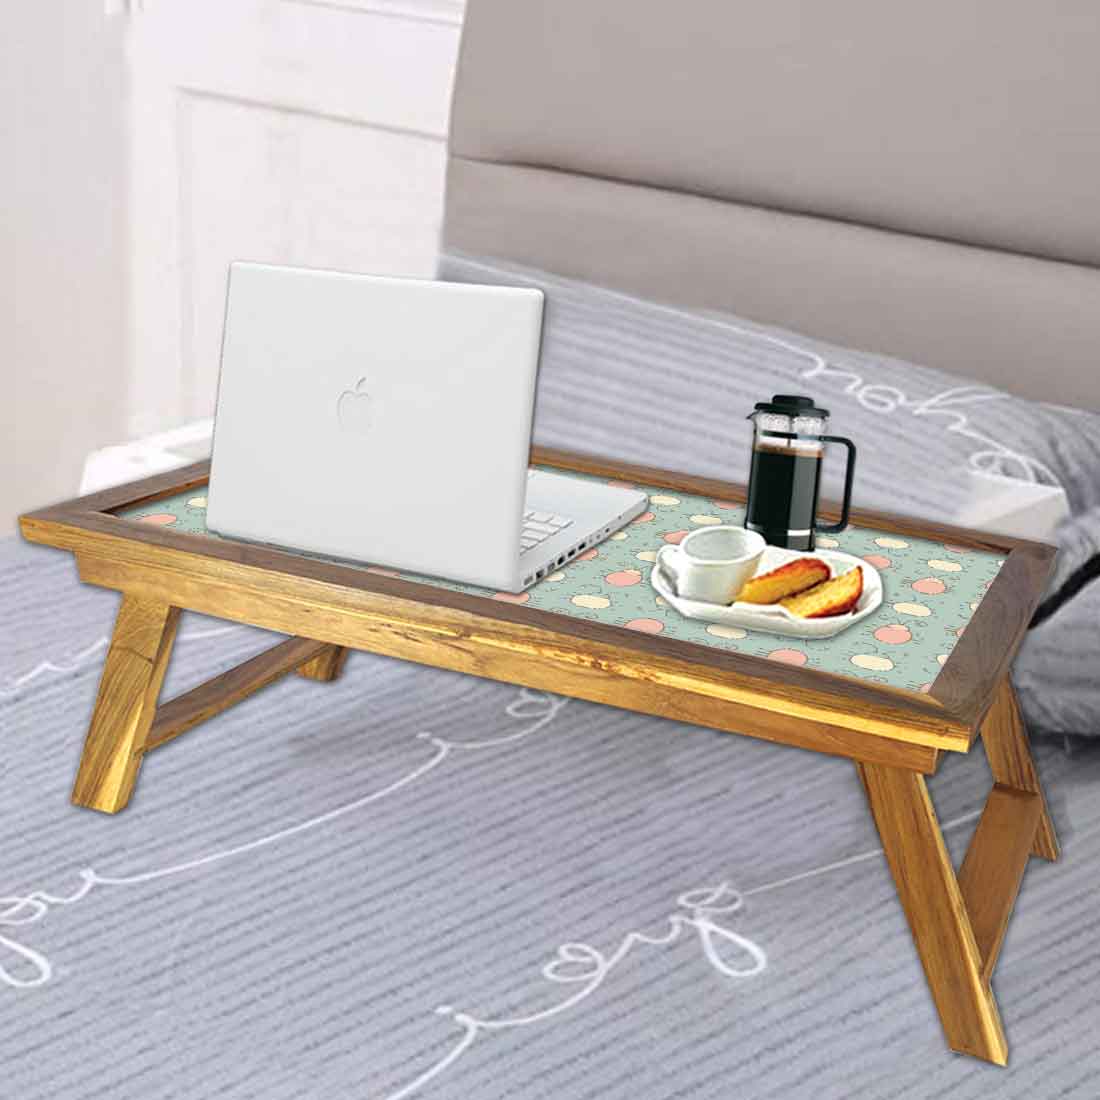 Modern Foldable Wooden Tray for Bed Breakfast Table Study Desk - Insect Nutcase